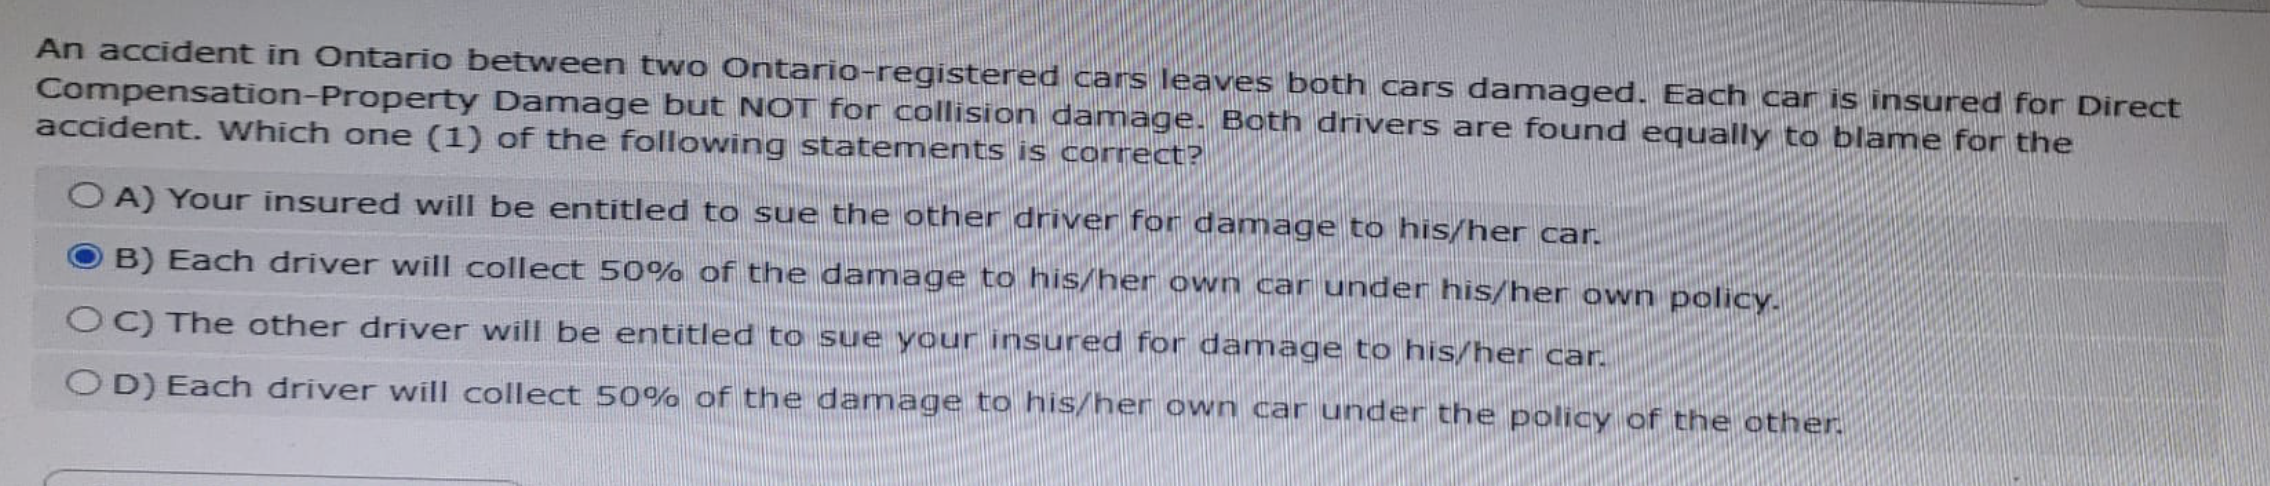 An accident in Ontario between two Ontario-registered cars leaves both cars damaged. Each car is insured for Direct
Compensation-Property Damage but NOT for collision damage. Both drivers are found equally to blame for the
accident. Which one (1) of the following statements is correct?
OA) Your insured will be entitled to sue the other driver for damage to his/her car.
B) Each driver will collect 50% of the damage to his/her own car under his/her own policy.
OC) The other driver will be entitled to sue your insured for damage to his/her car.
OD) Each driver will collect 50% of the damage to his/her own car under the policy of the other.